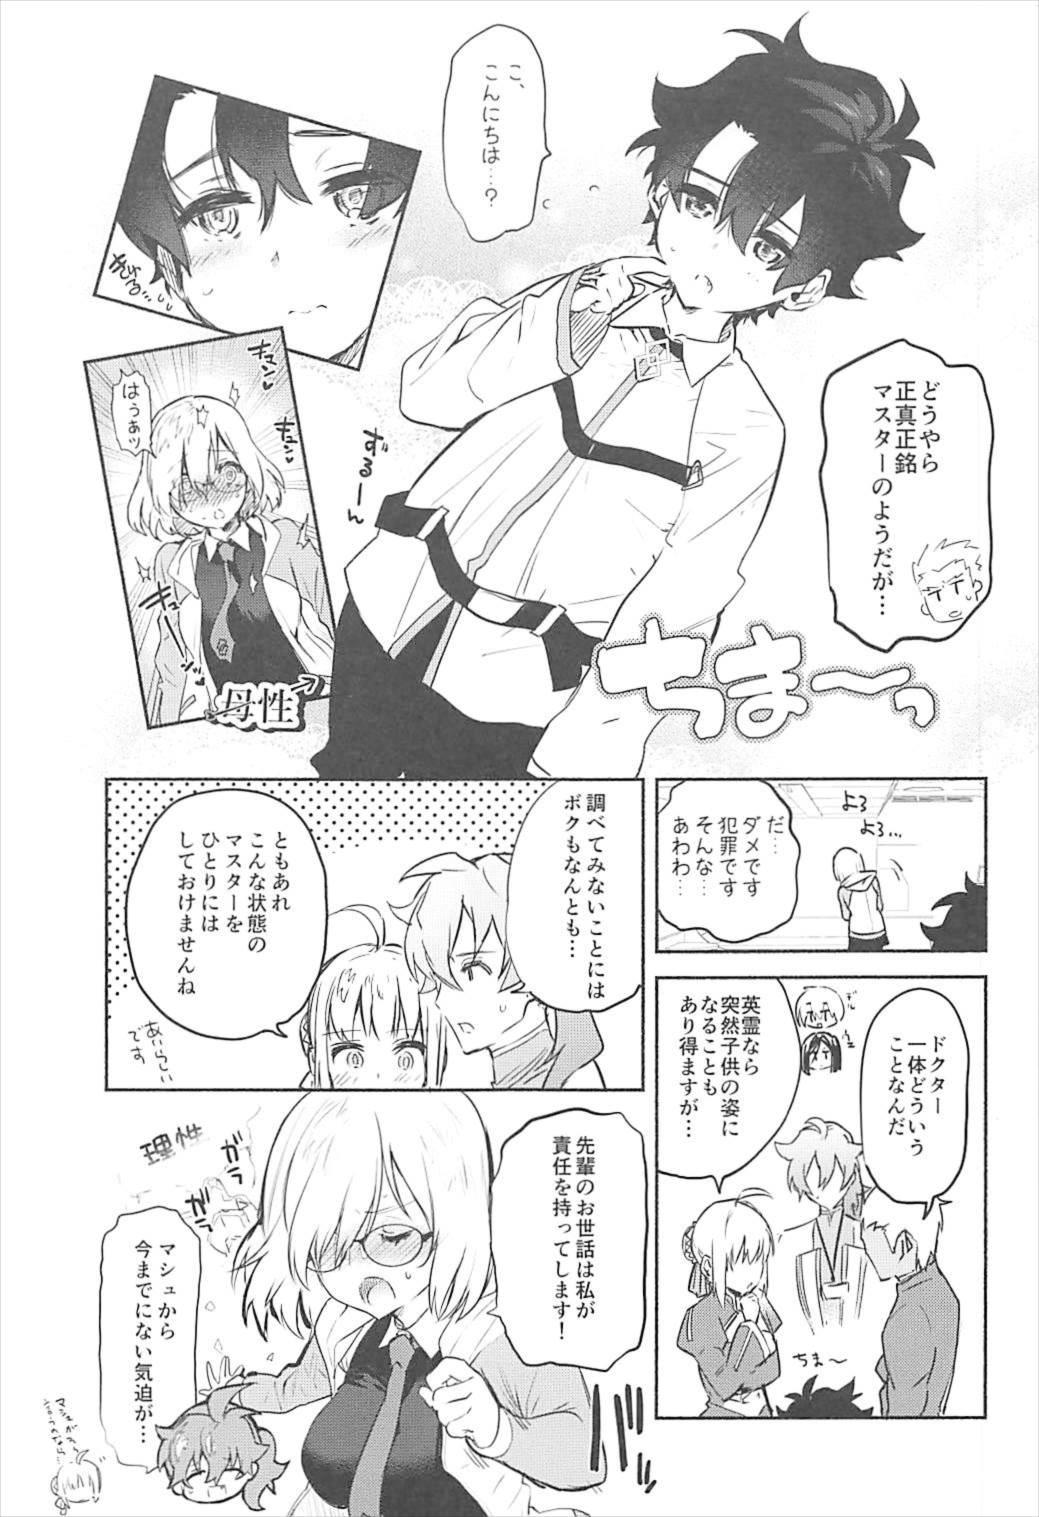 Flogging Mash to Issho - Fate grand order Beauty - Page 4